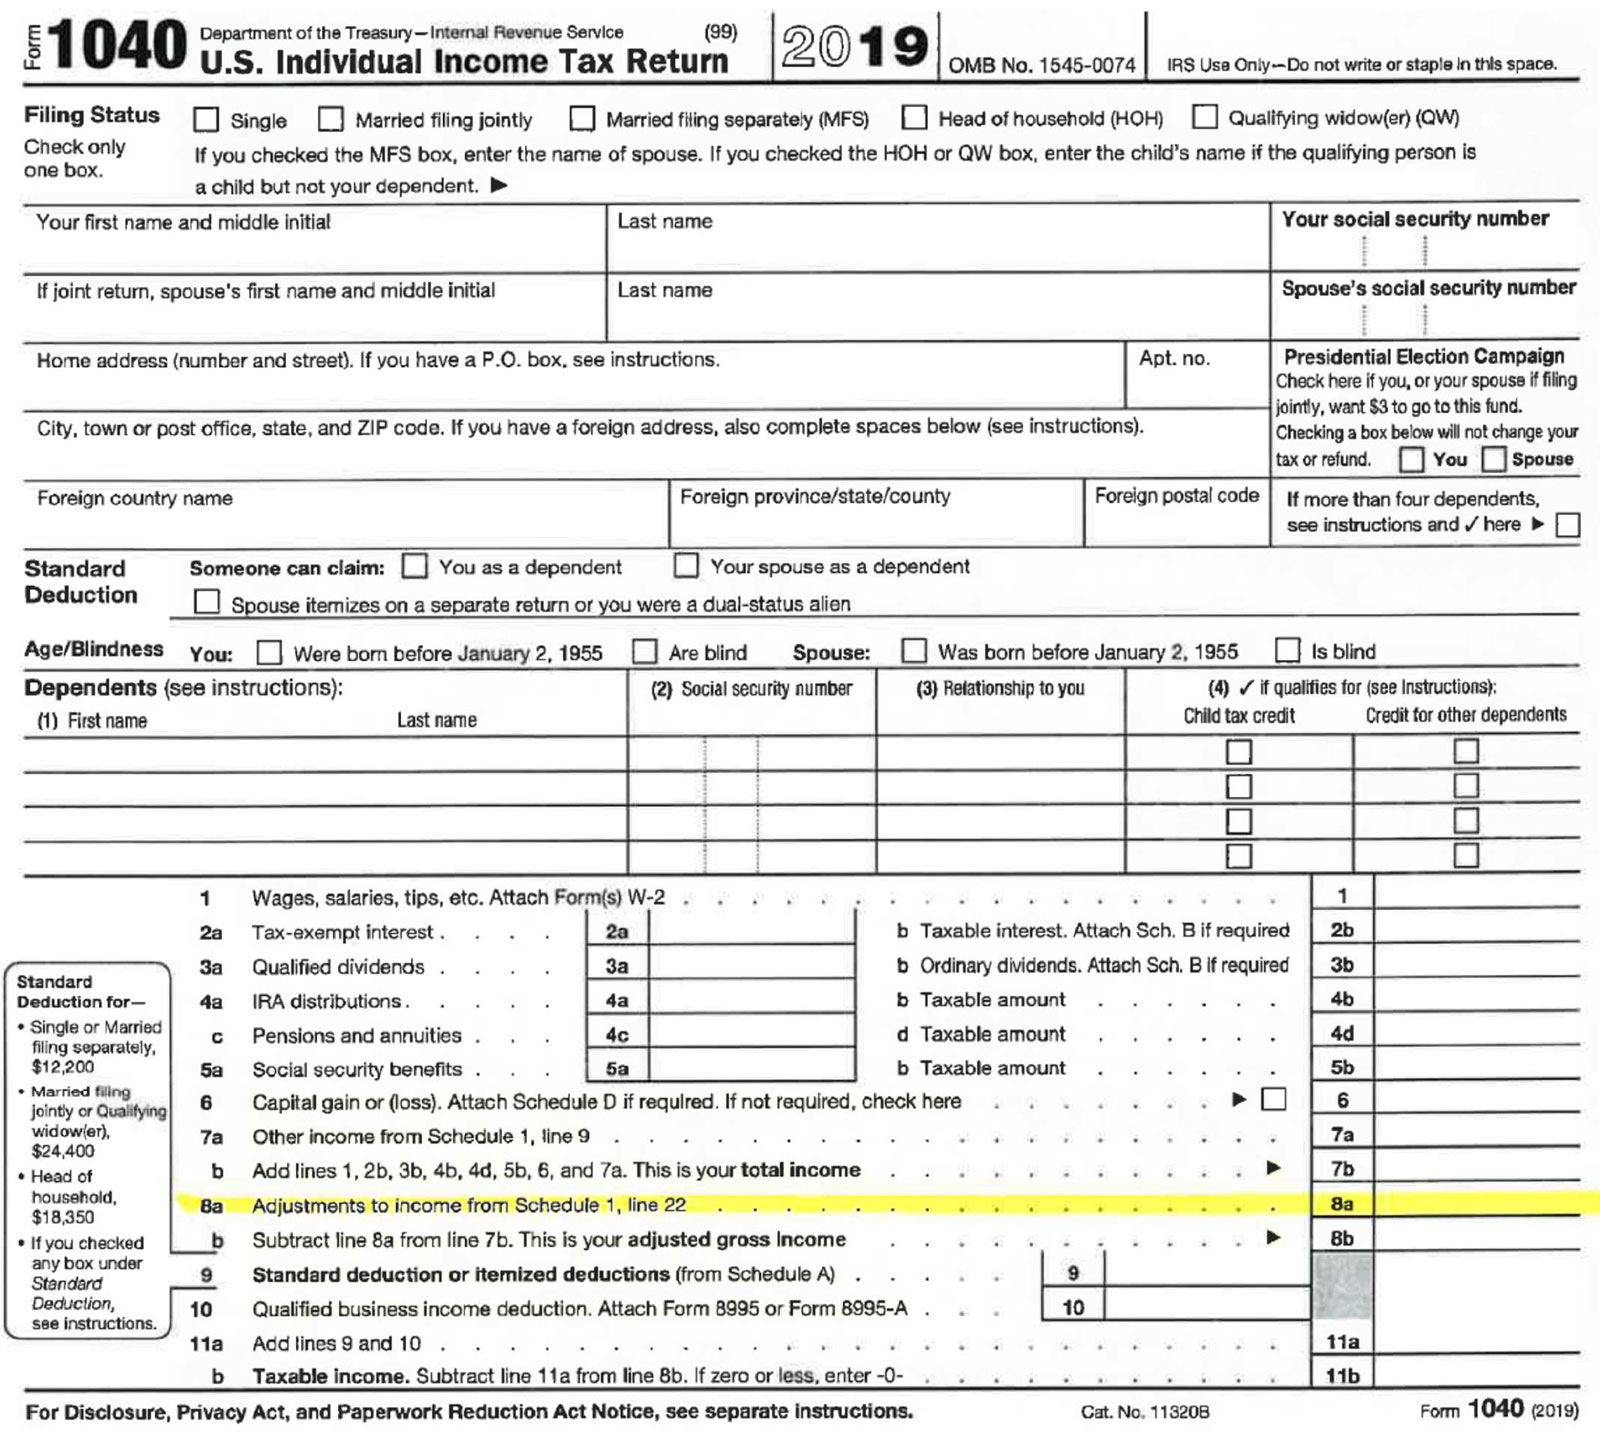 Irs Schedule 1 Instructions 2022 Do You Need To Submit A Schedule 1, 2, And 3 Along With Your 1040 Tax  Return? | Student Financial Aid